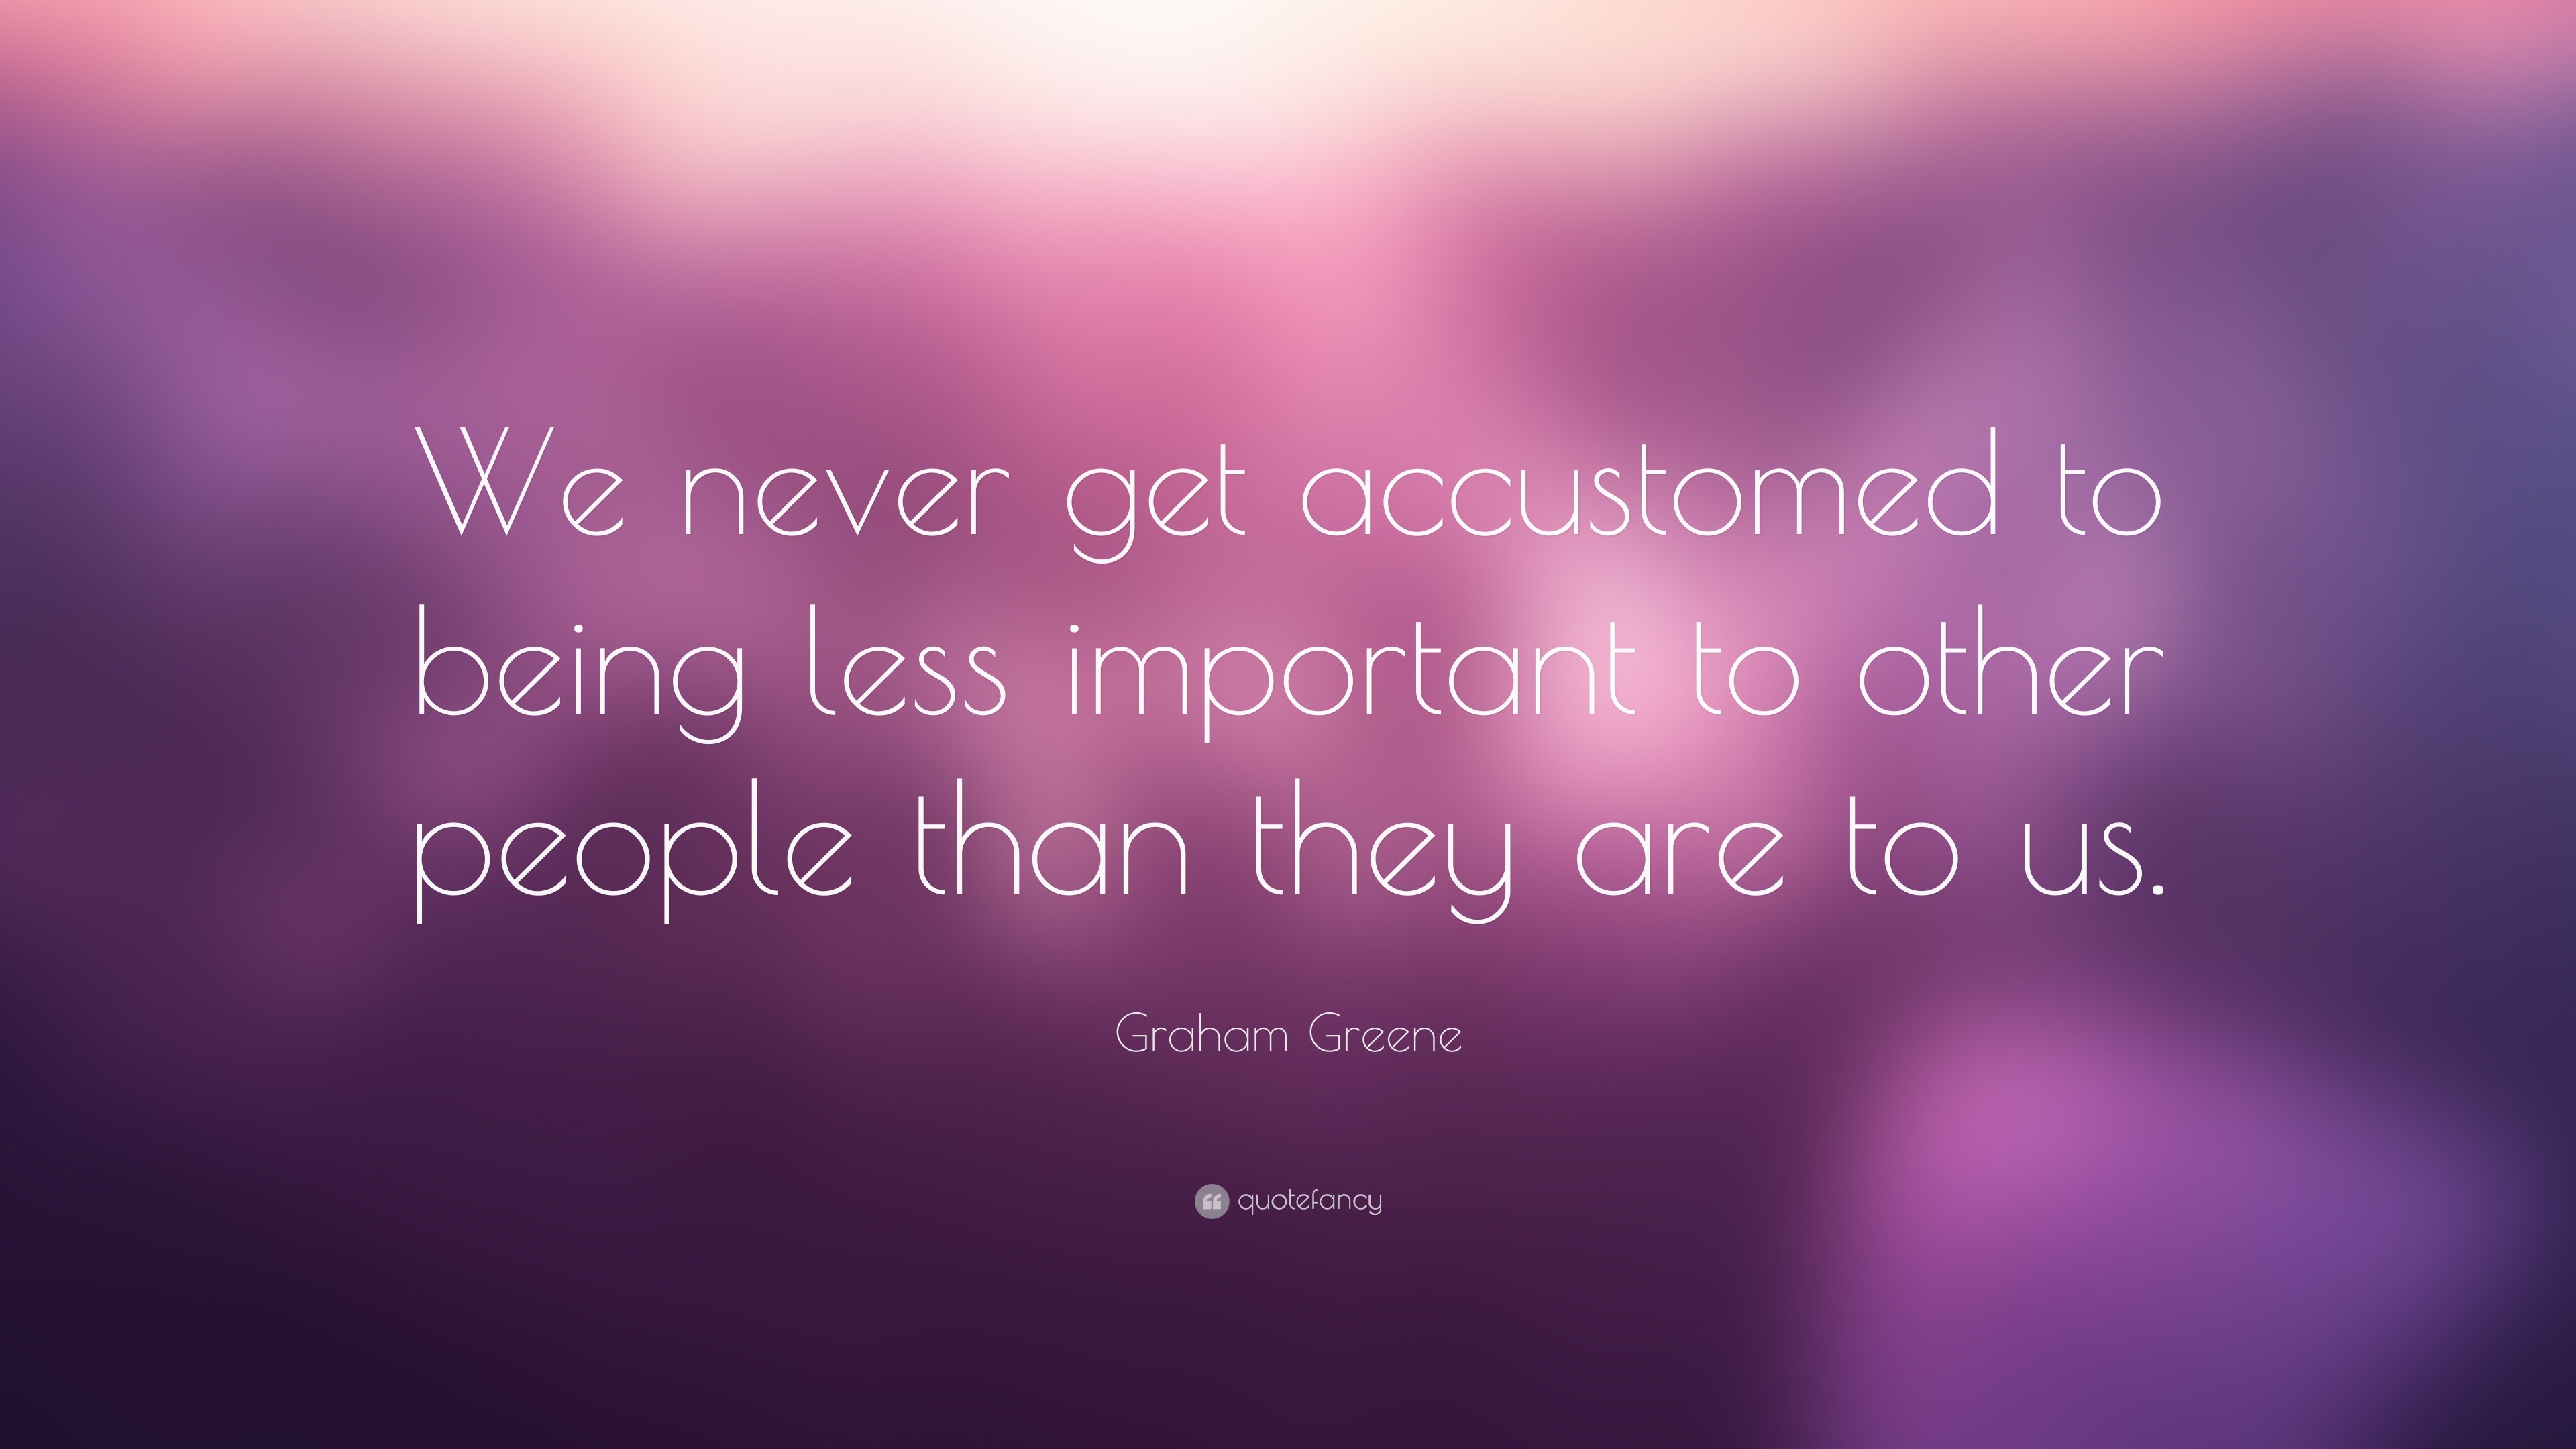 Graham Greene Quote: We never get accustomed to being less important